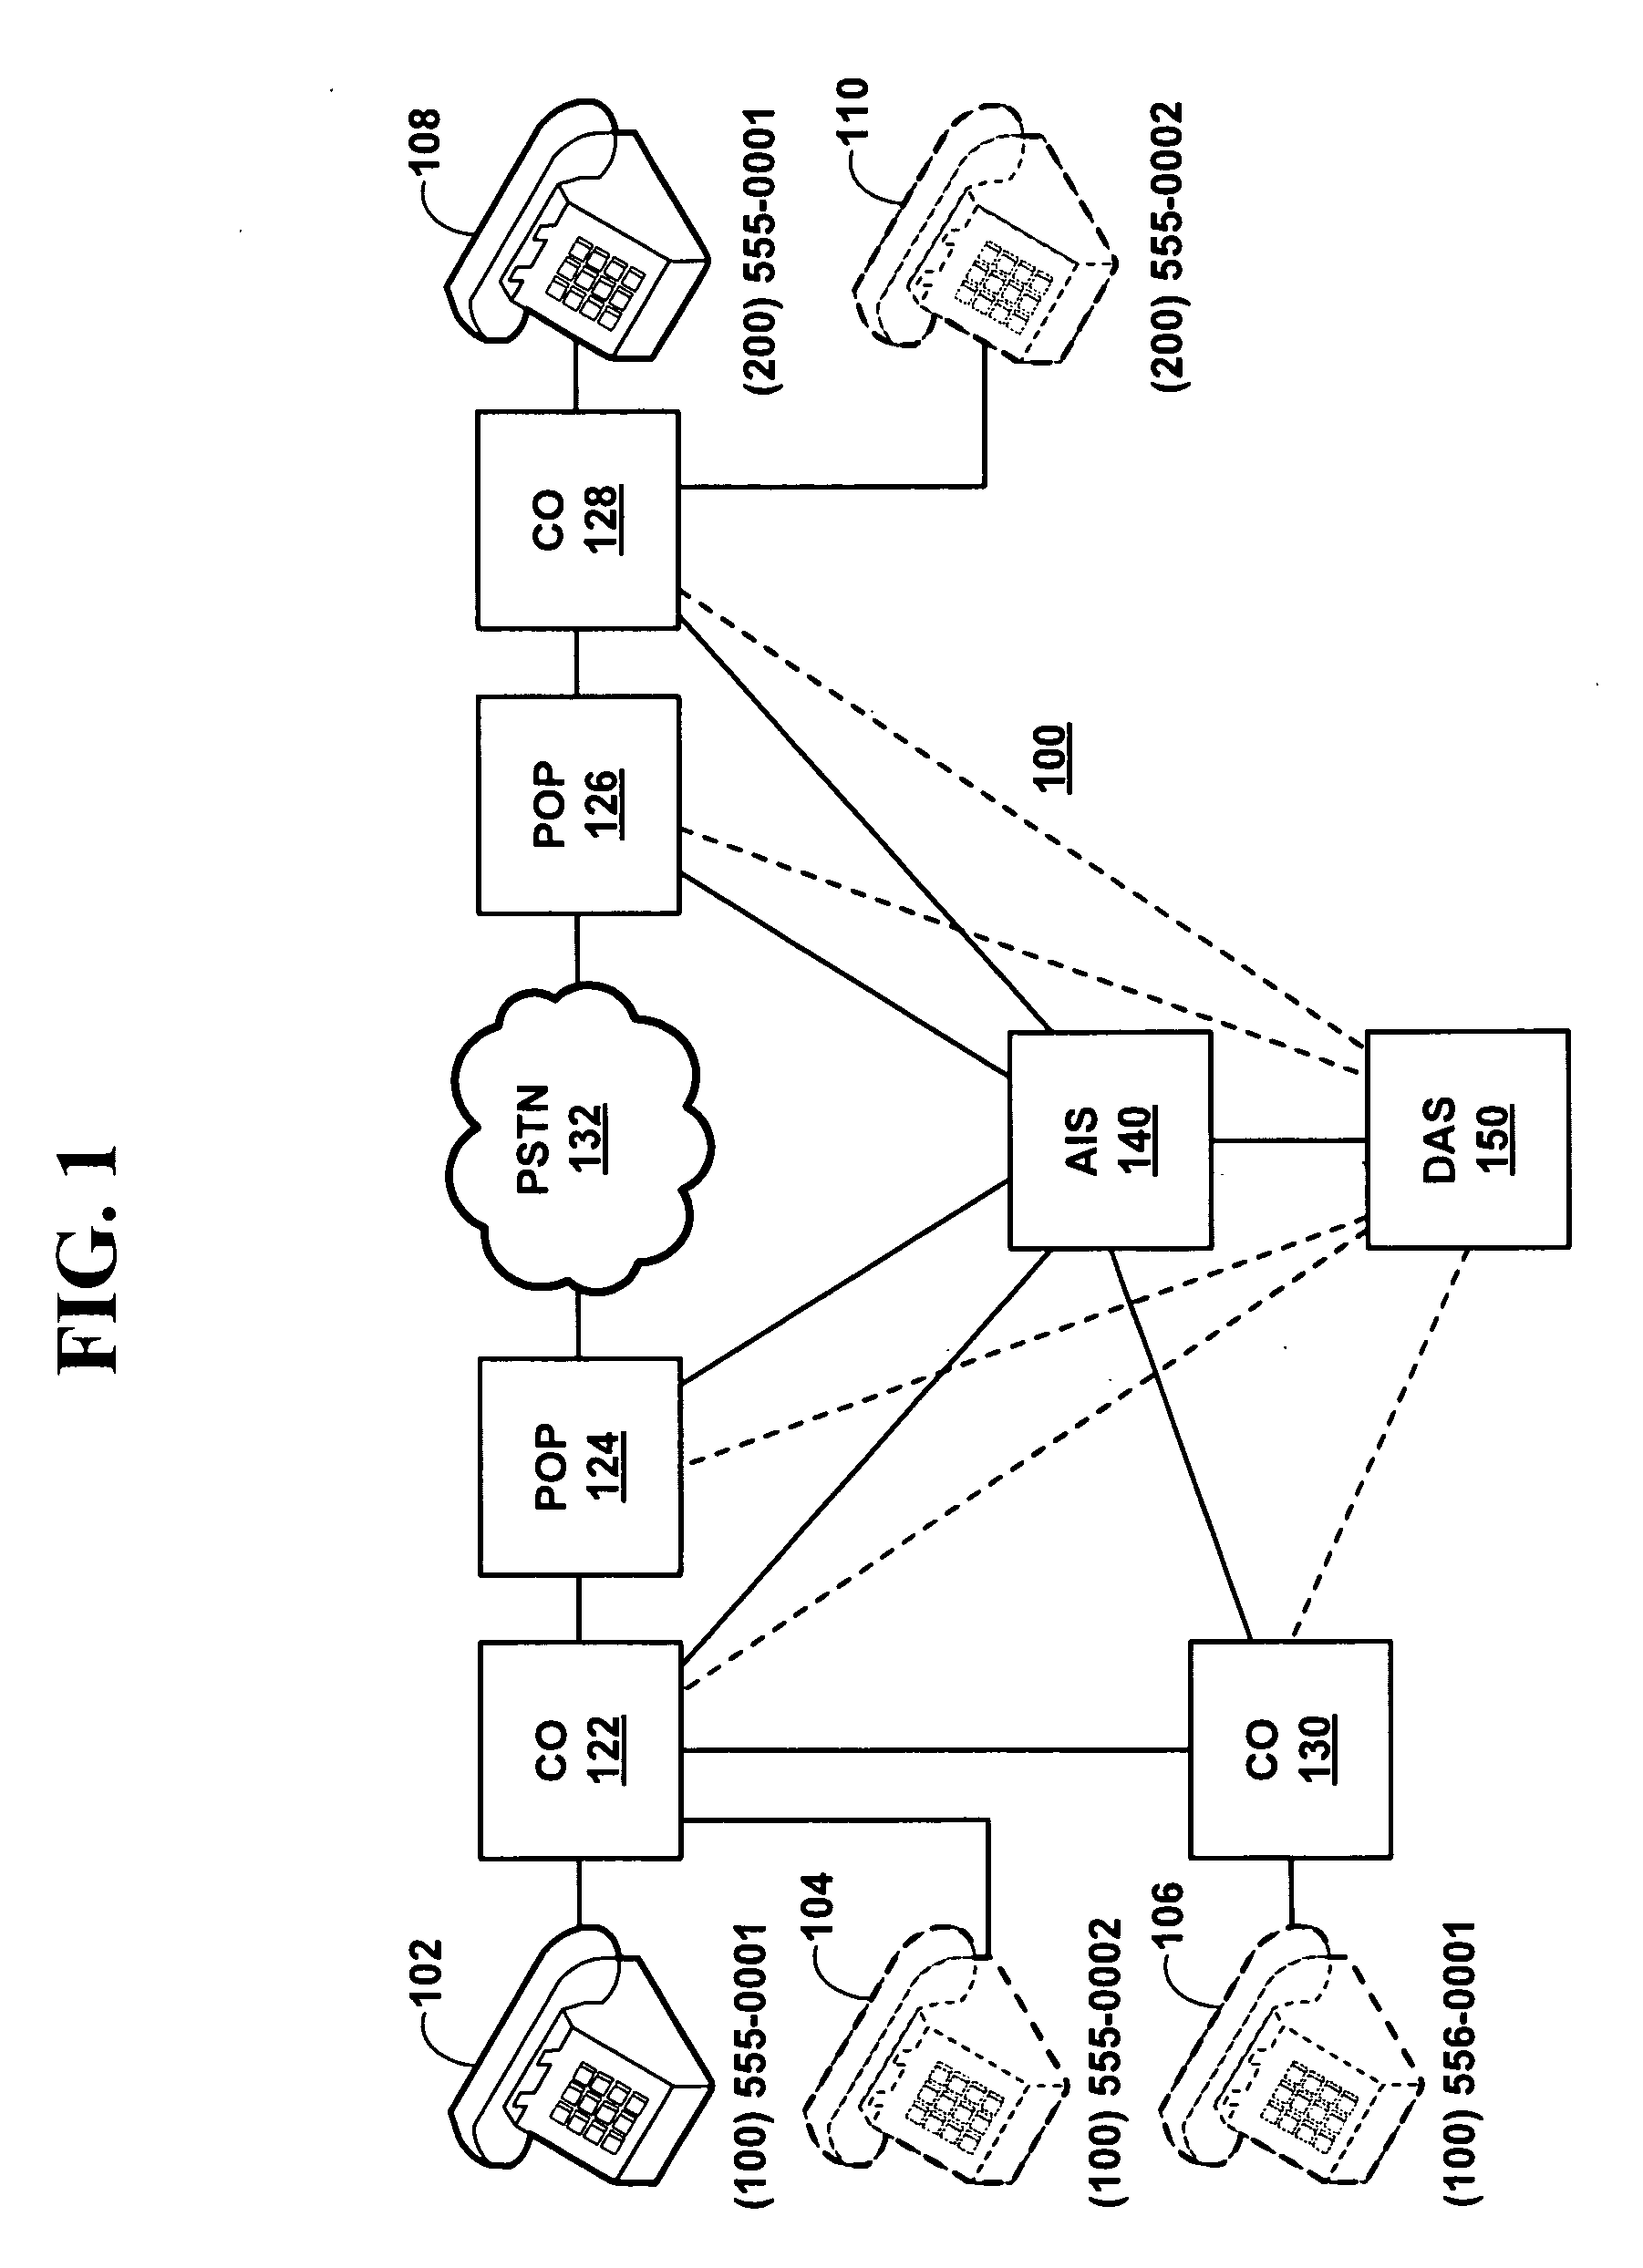 Method and system for providing directory assistance to erroneous telephone calls